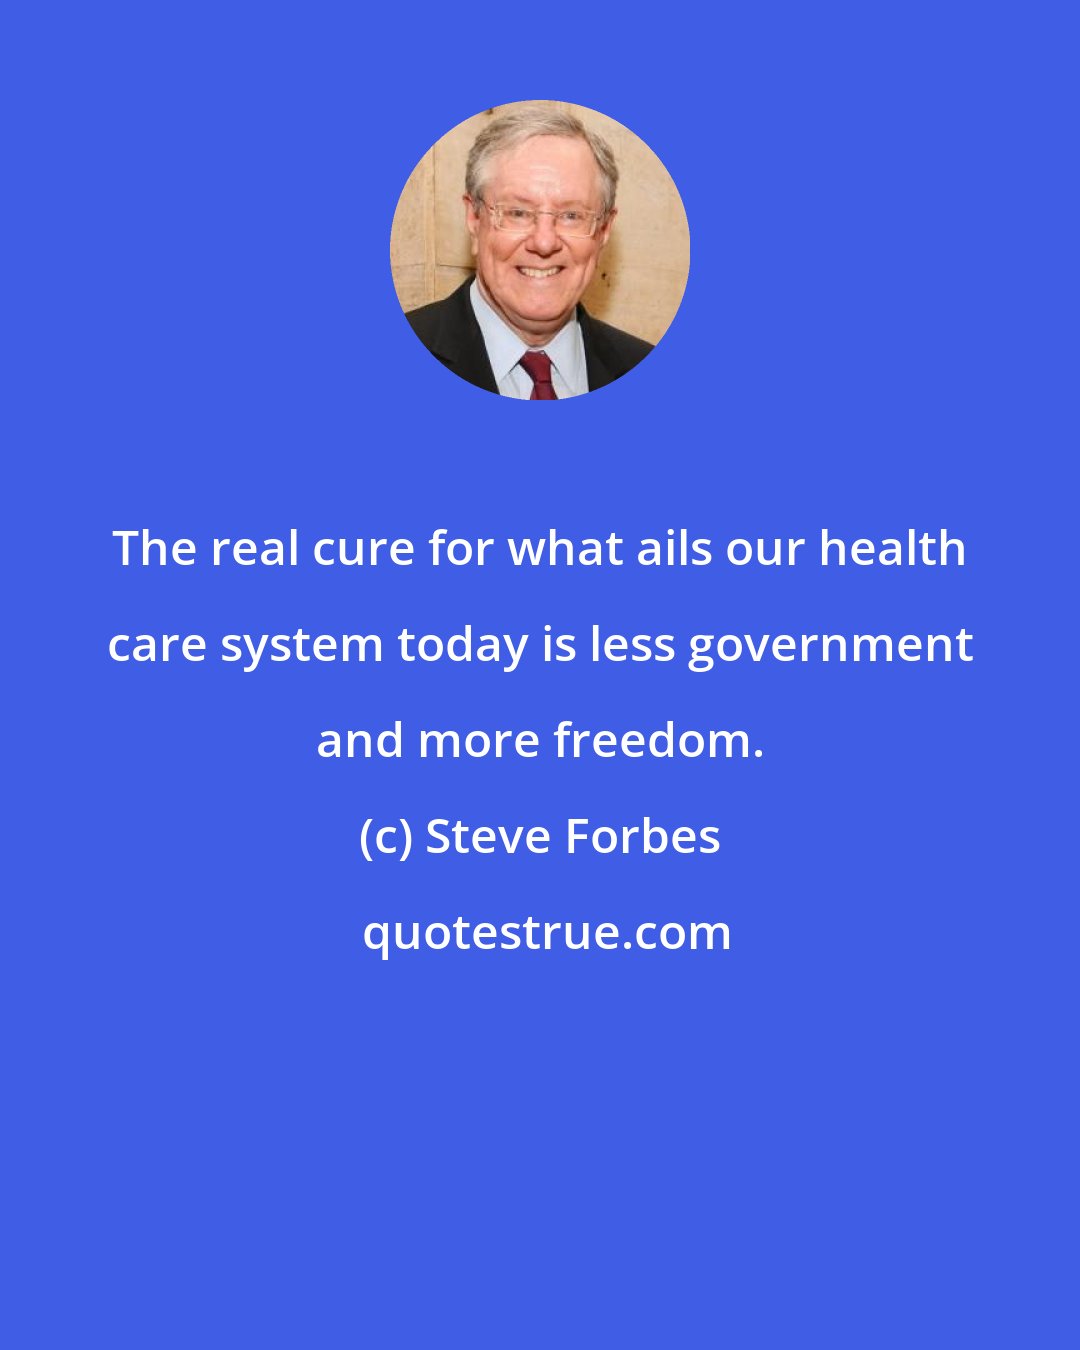 Steve Forbes: The real cure for what ails our health care system today is less government and more freedom.